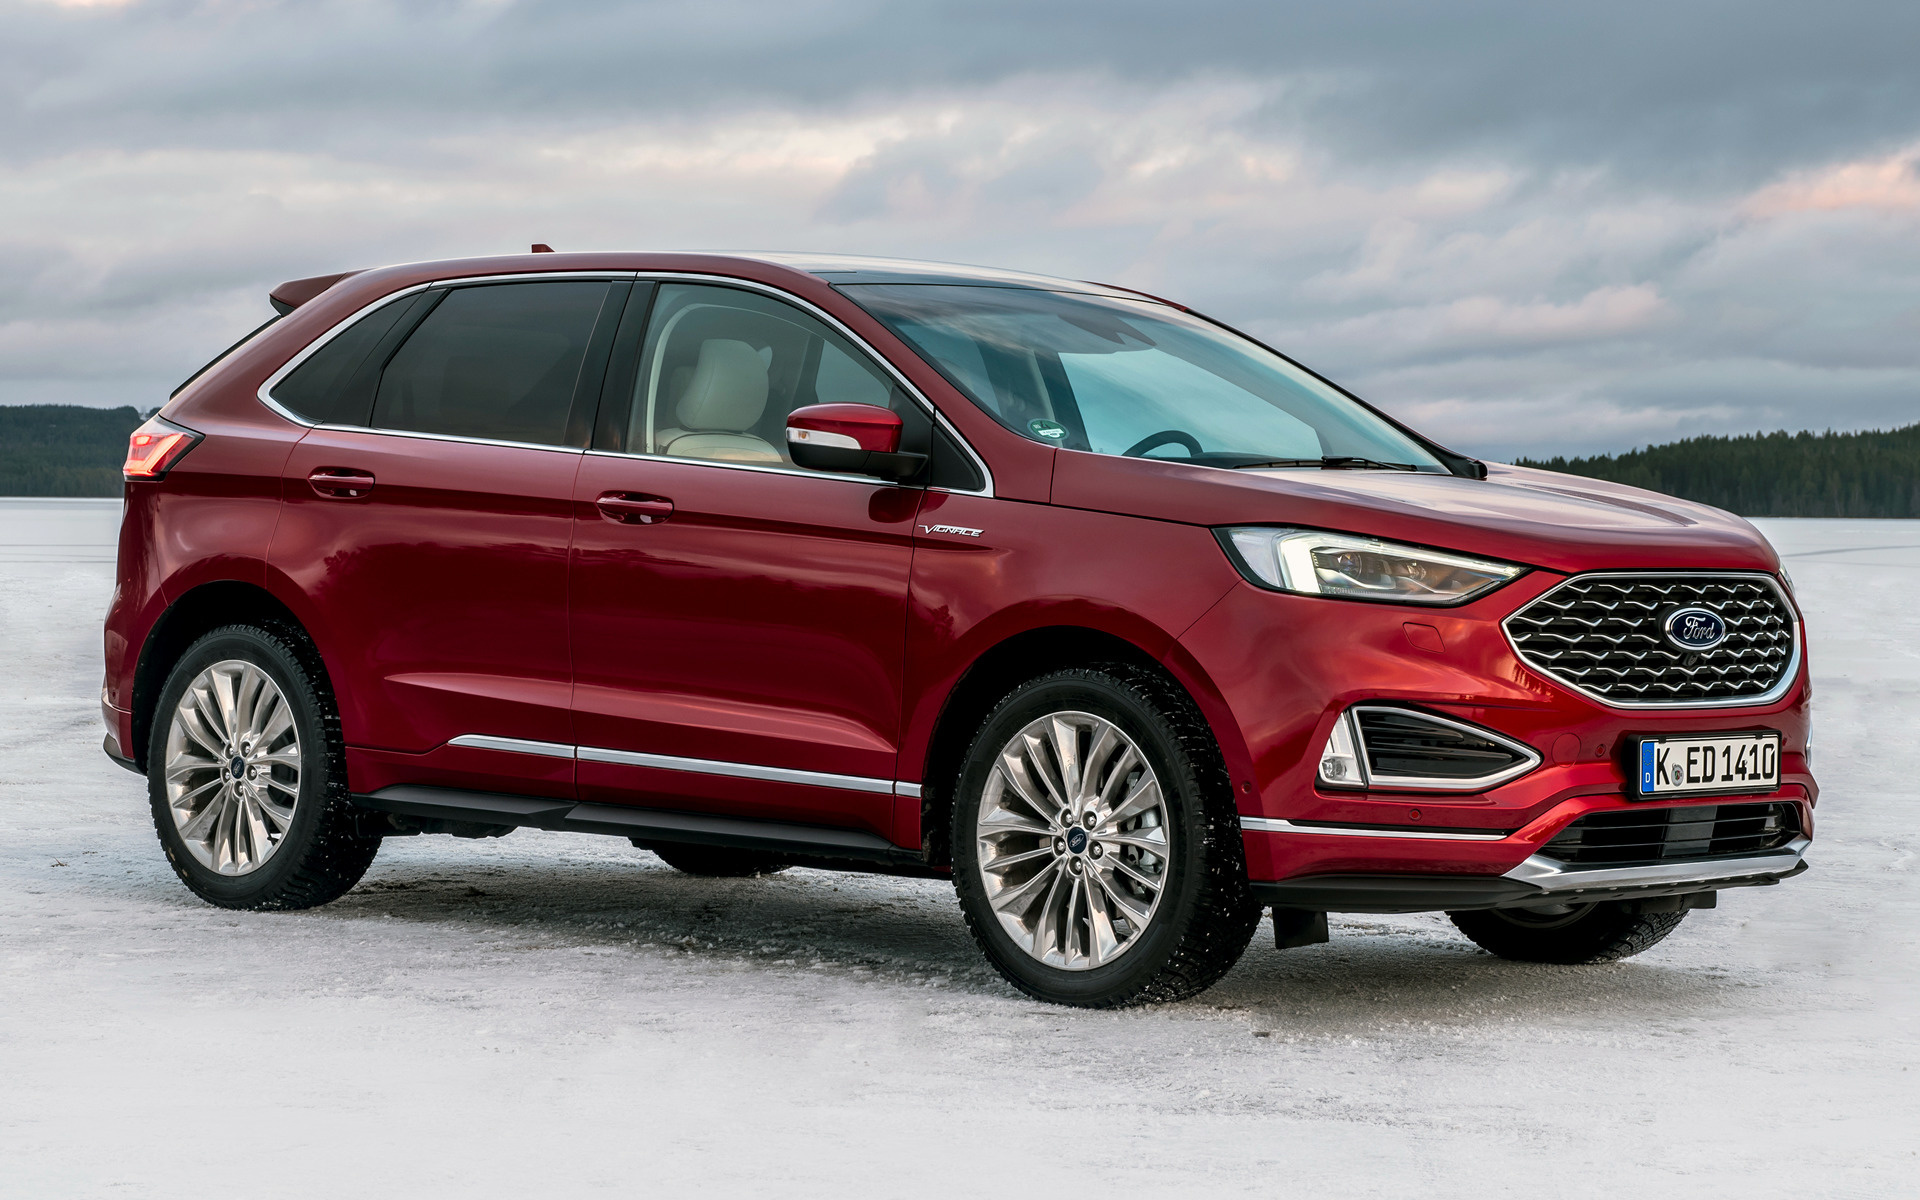 Ford Edge, Bold and aggressive, Advanced safety technology, Sporty design, 1920x1200 HD Desktop